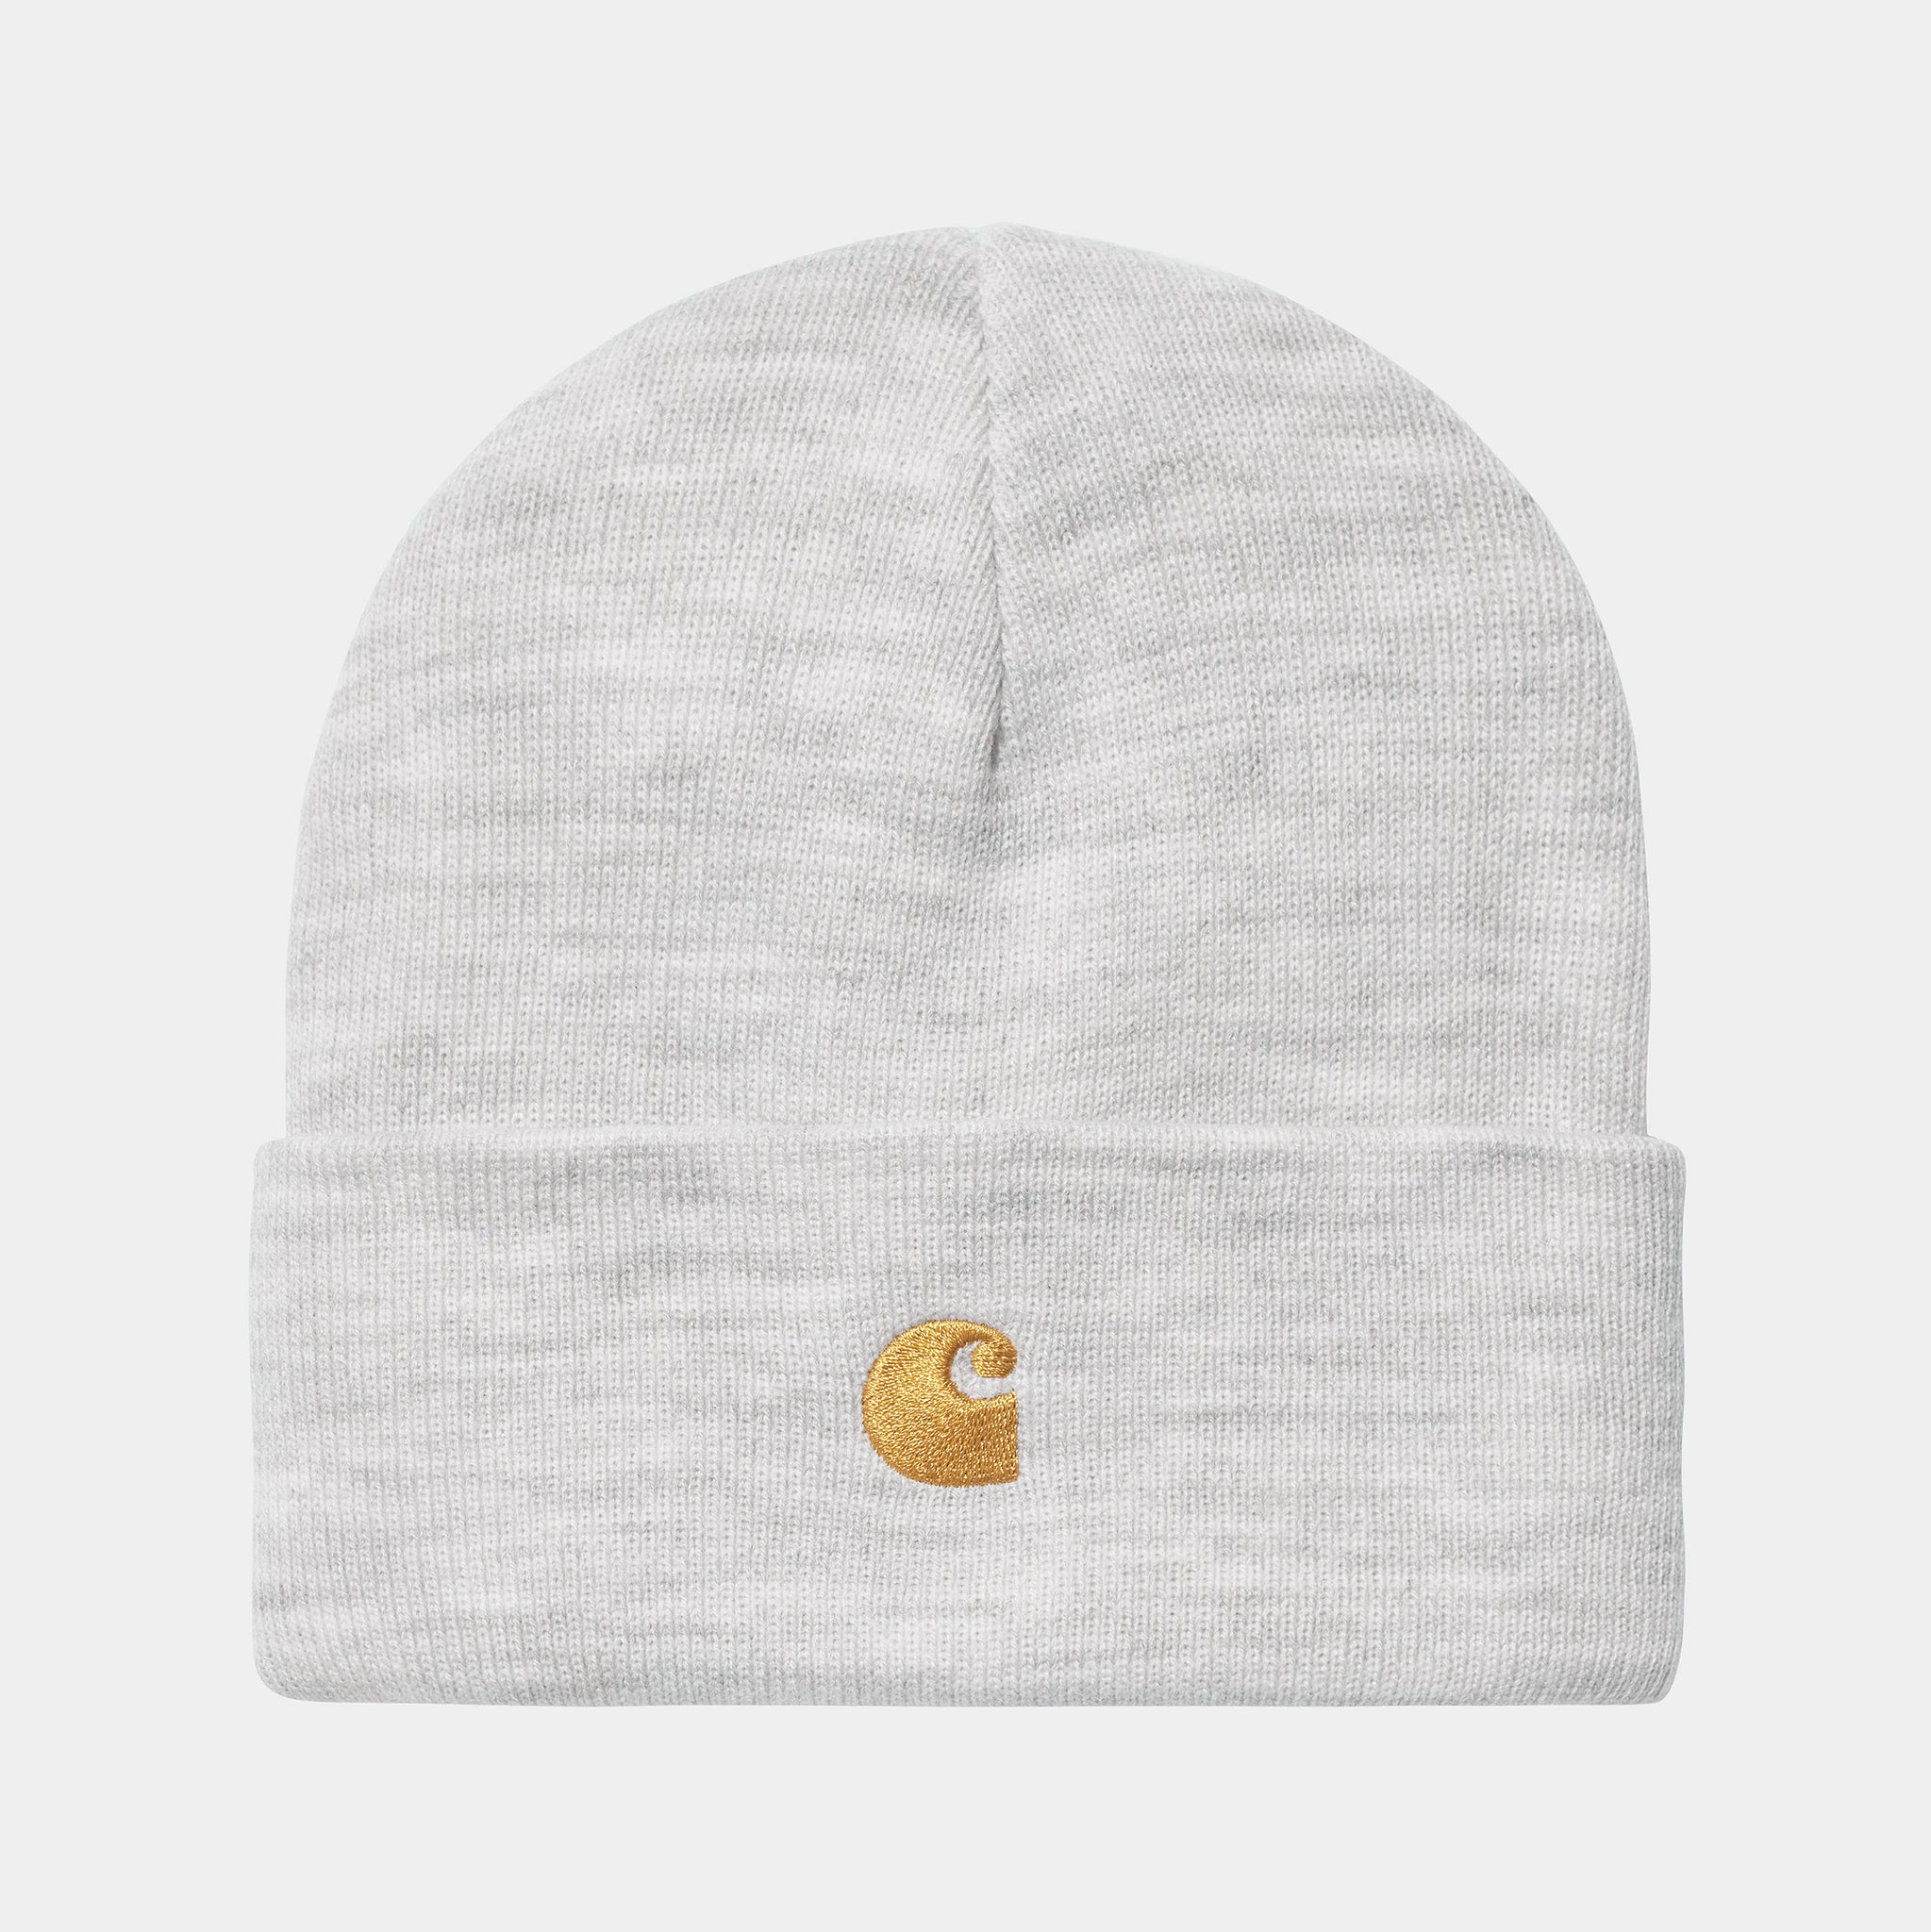 Chase Beanie - Ash Heather/Gold